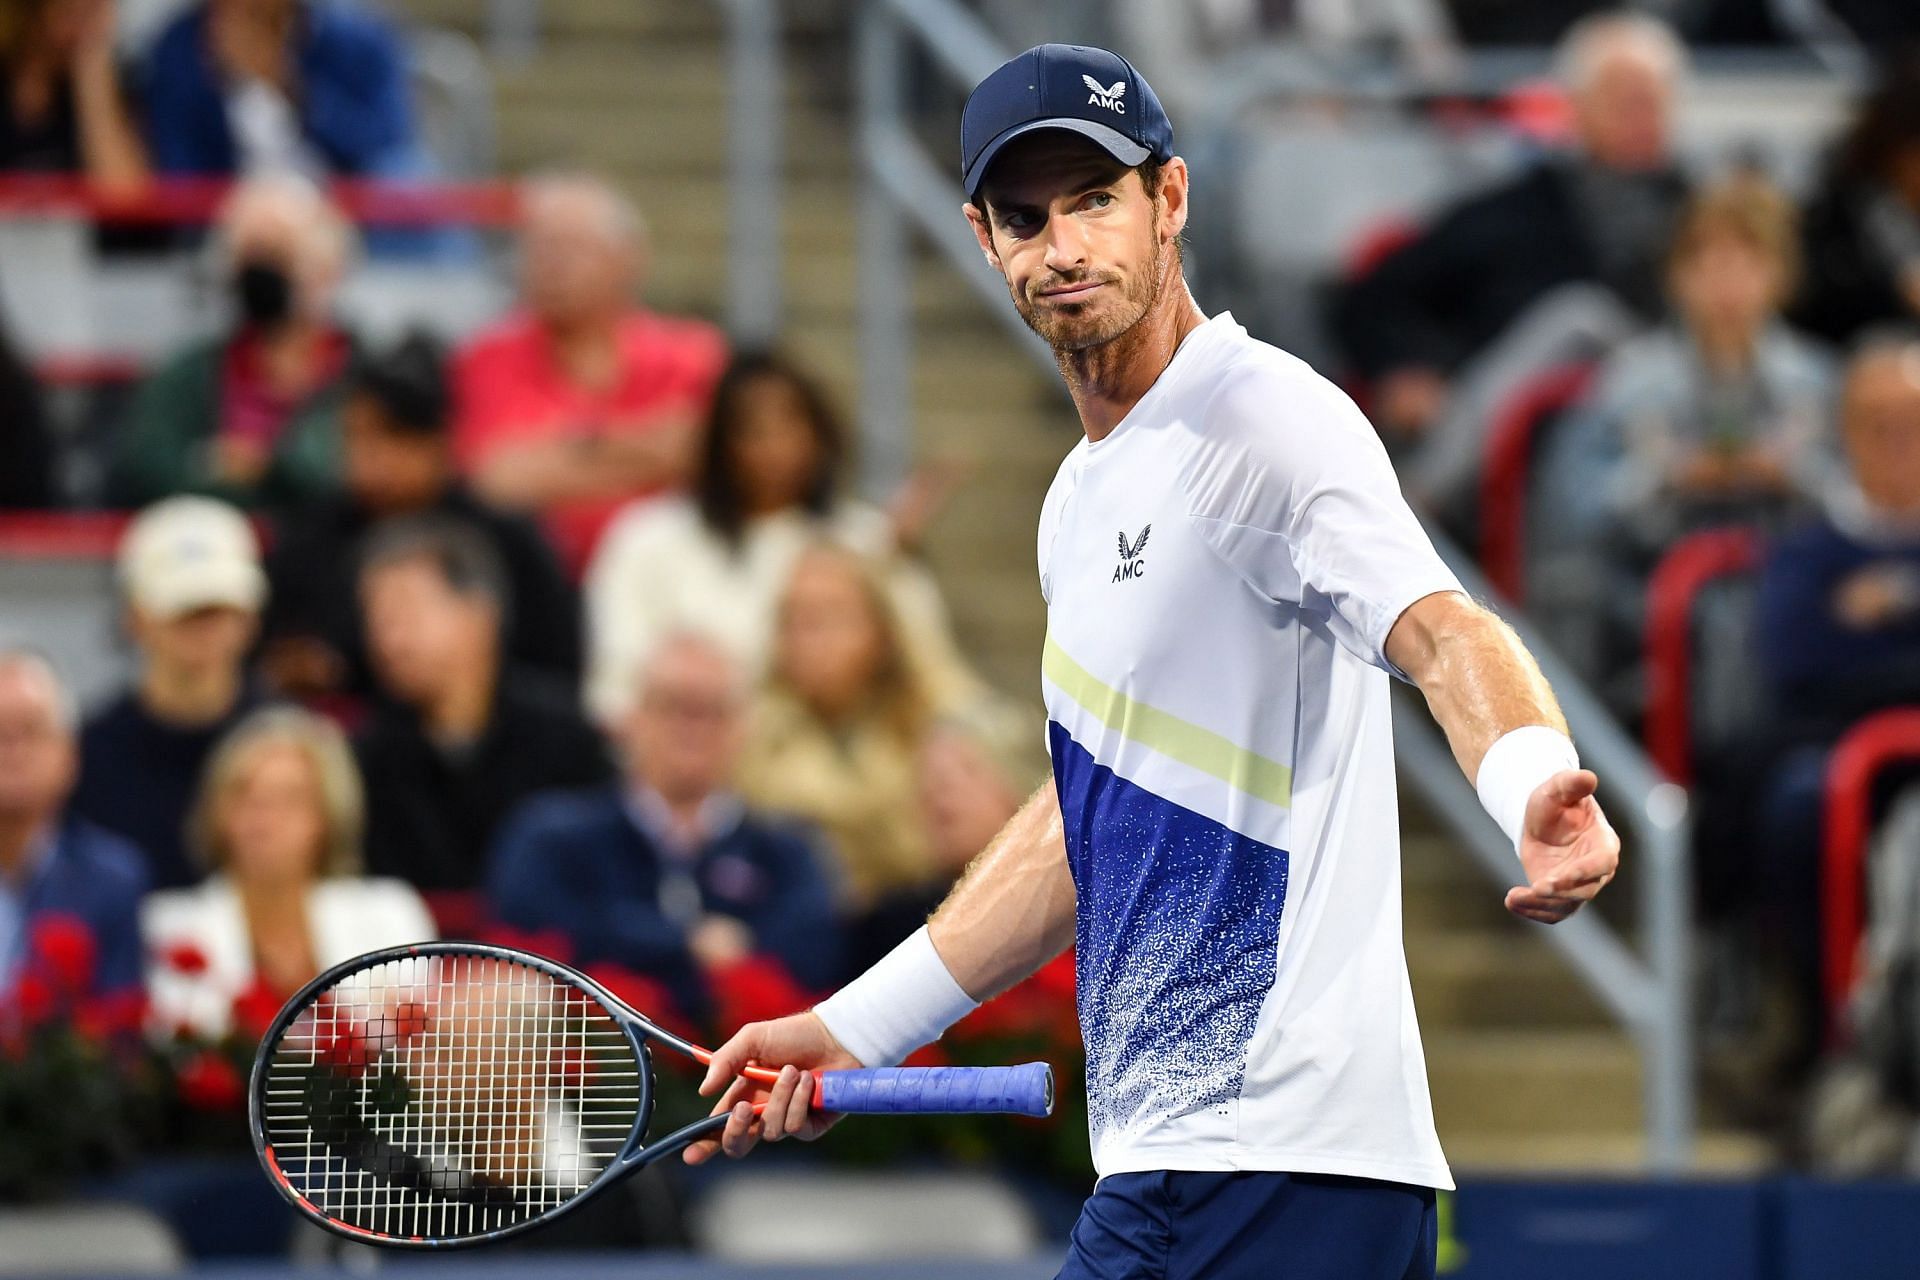 Andy Murray playing against Taylor Fritz at the 2022 Canadian Open